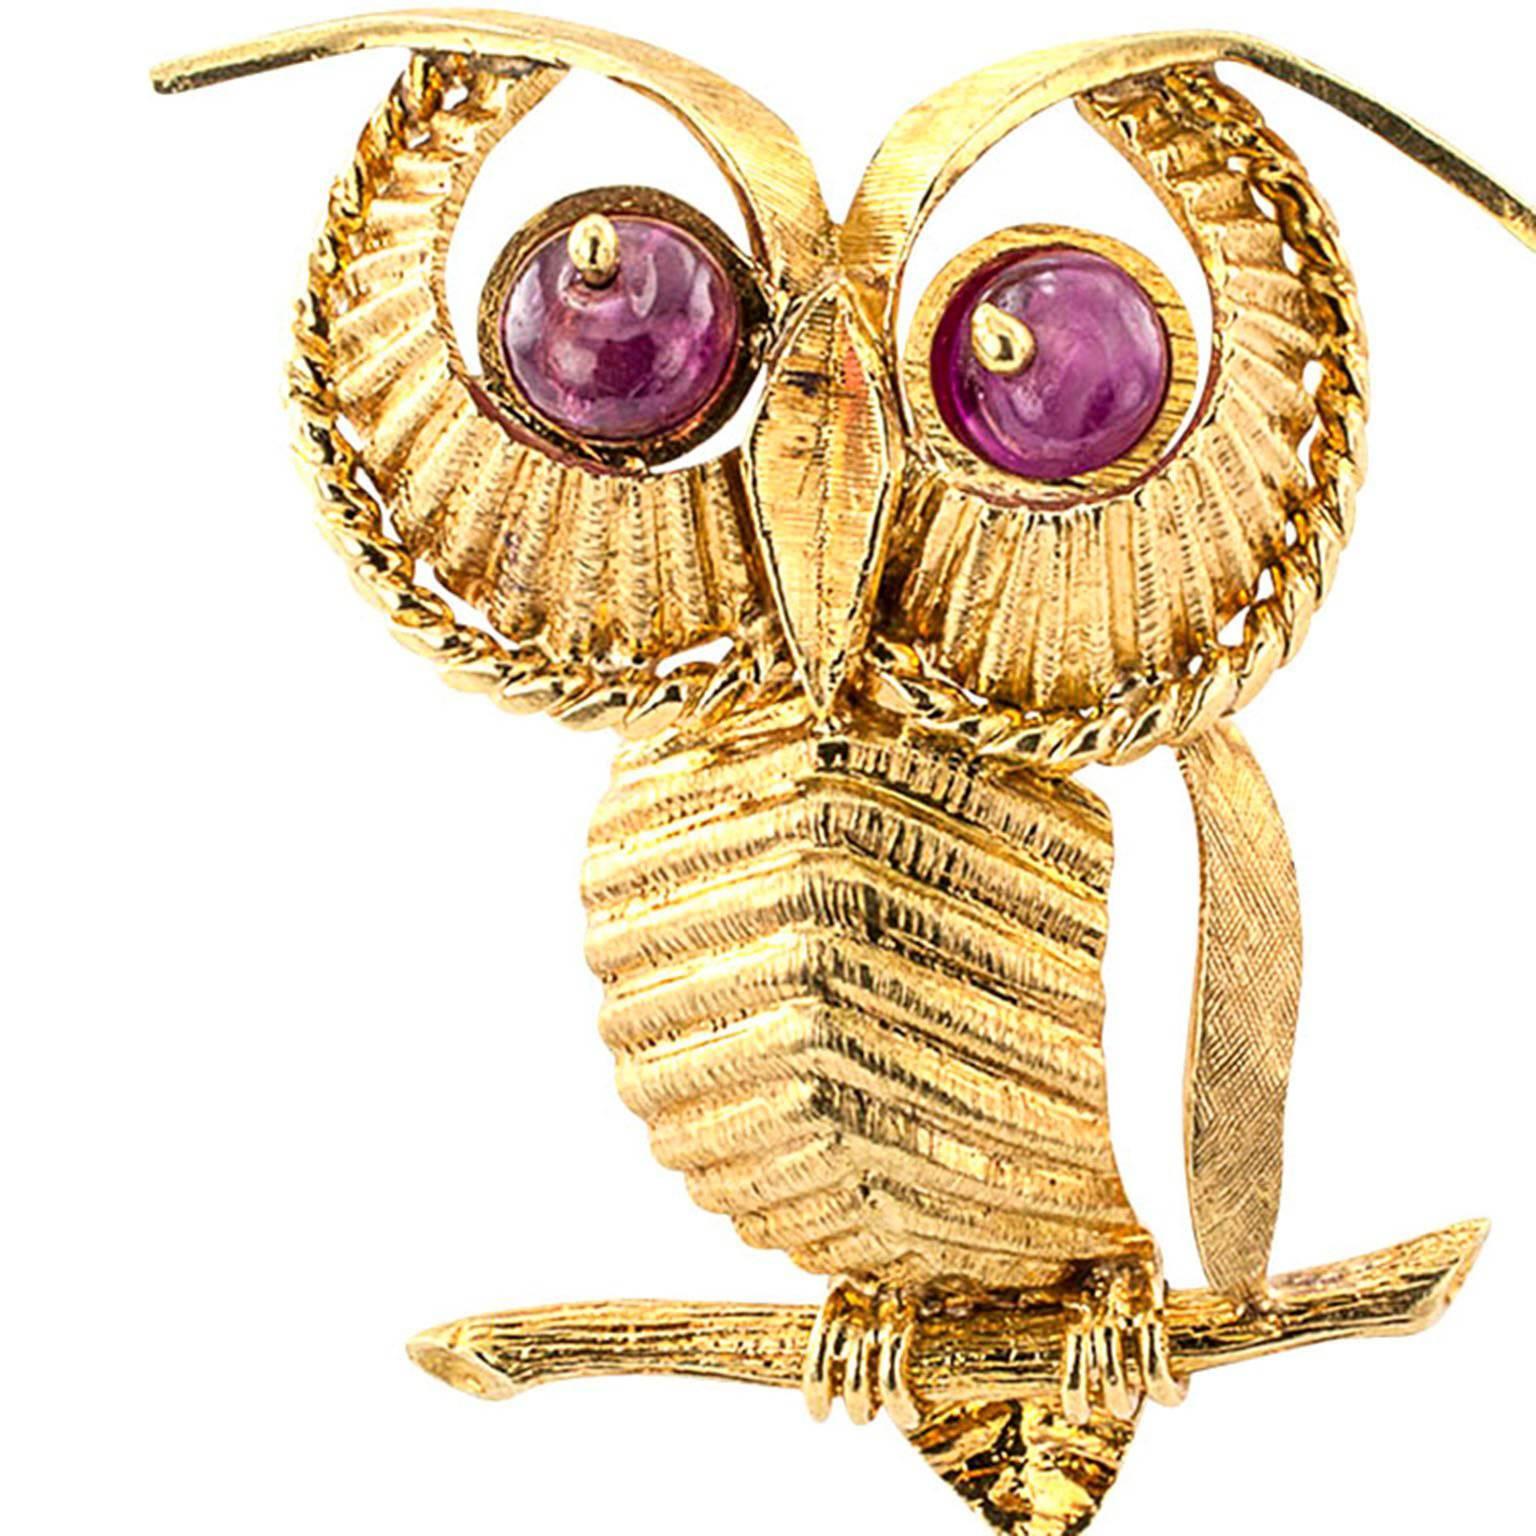 Zolotas Estate Owl Brooch Circa 1970

According to the House of Zolotas, jewelry is 